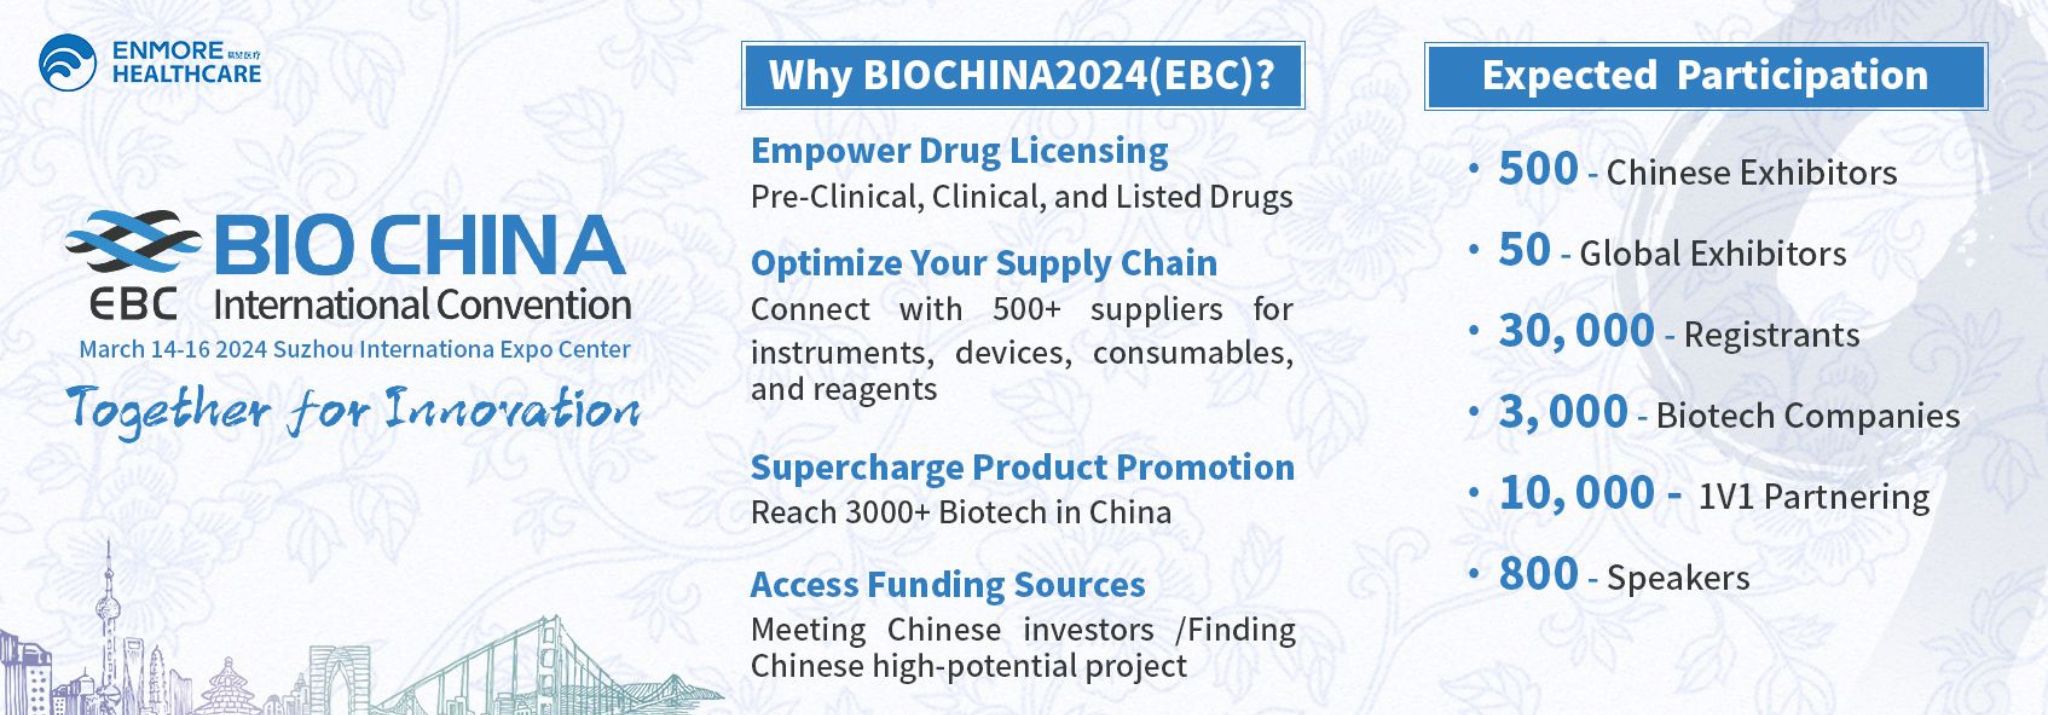 Join the BIOCHINA2024 International Convention